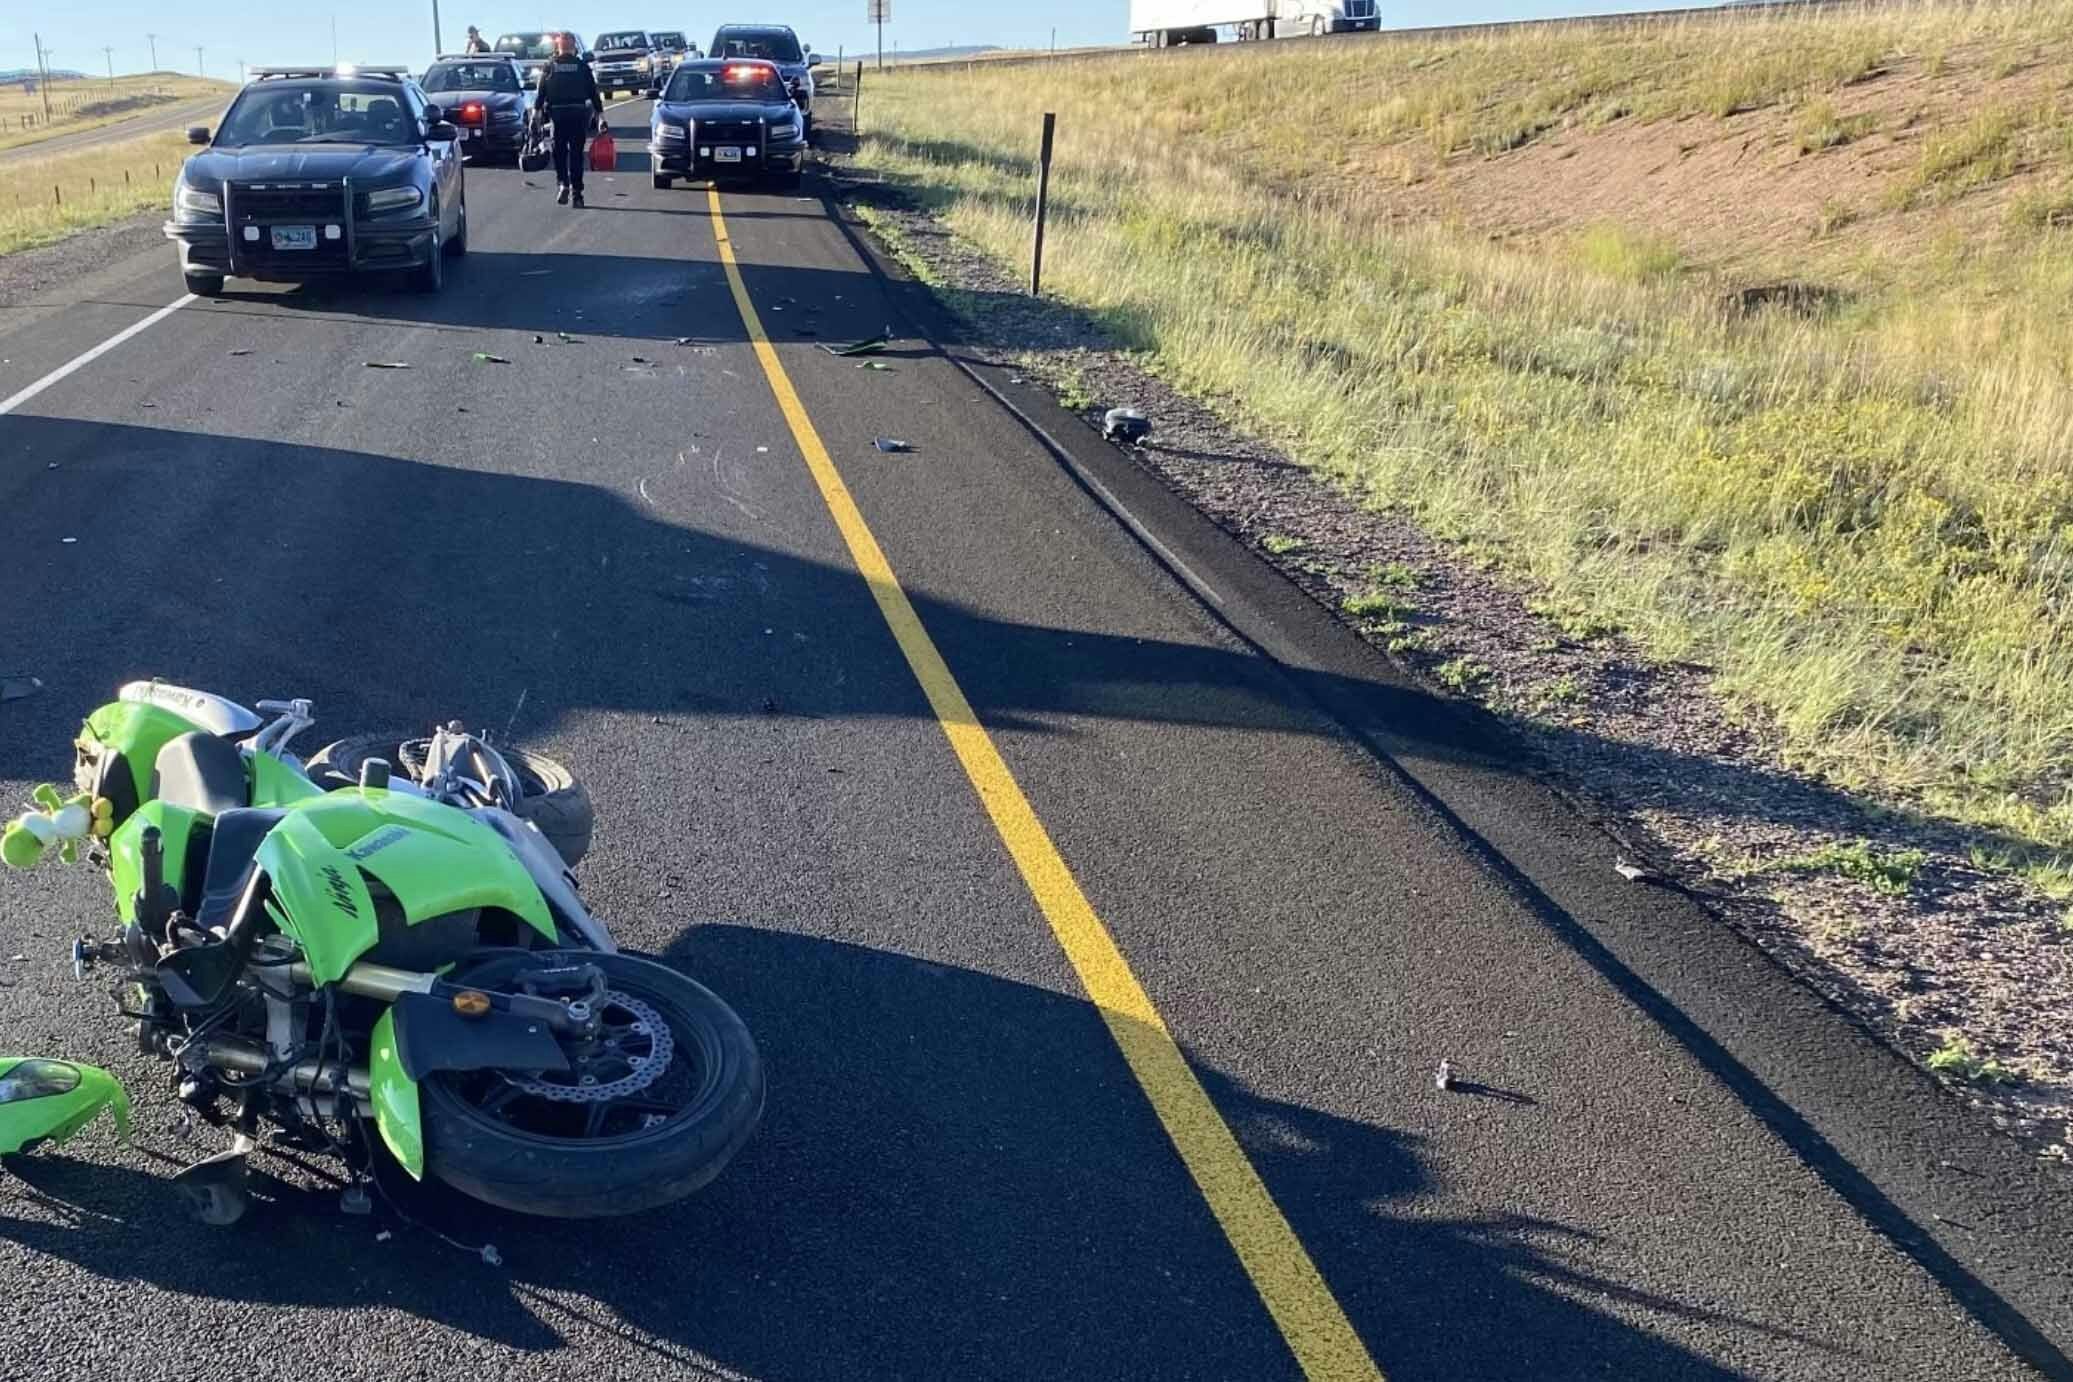 A motorcyclist led the Wyoming Highway Patrol on a 71-mile chase on Monday and exceeded speeds of 165mph